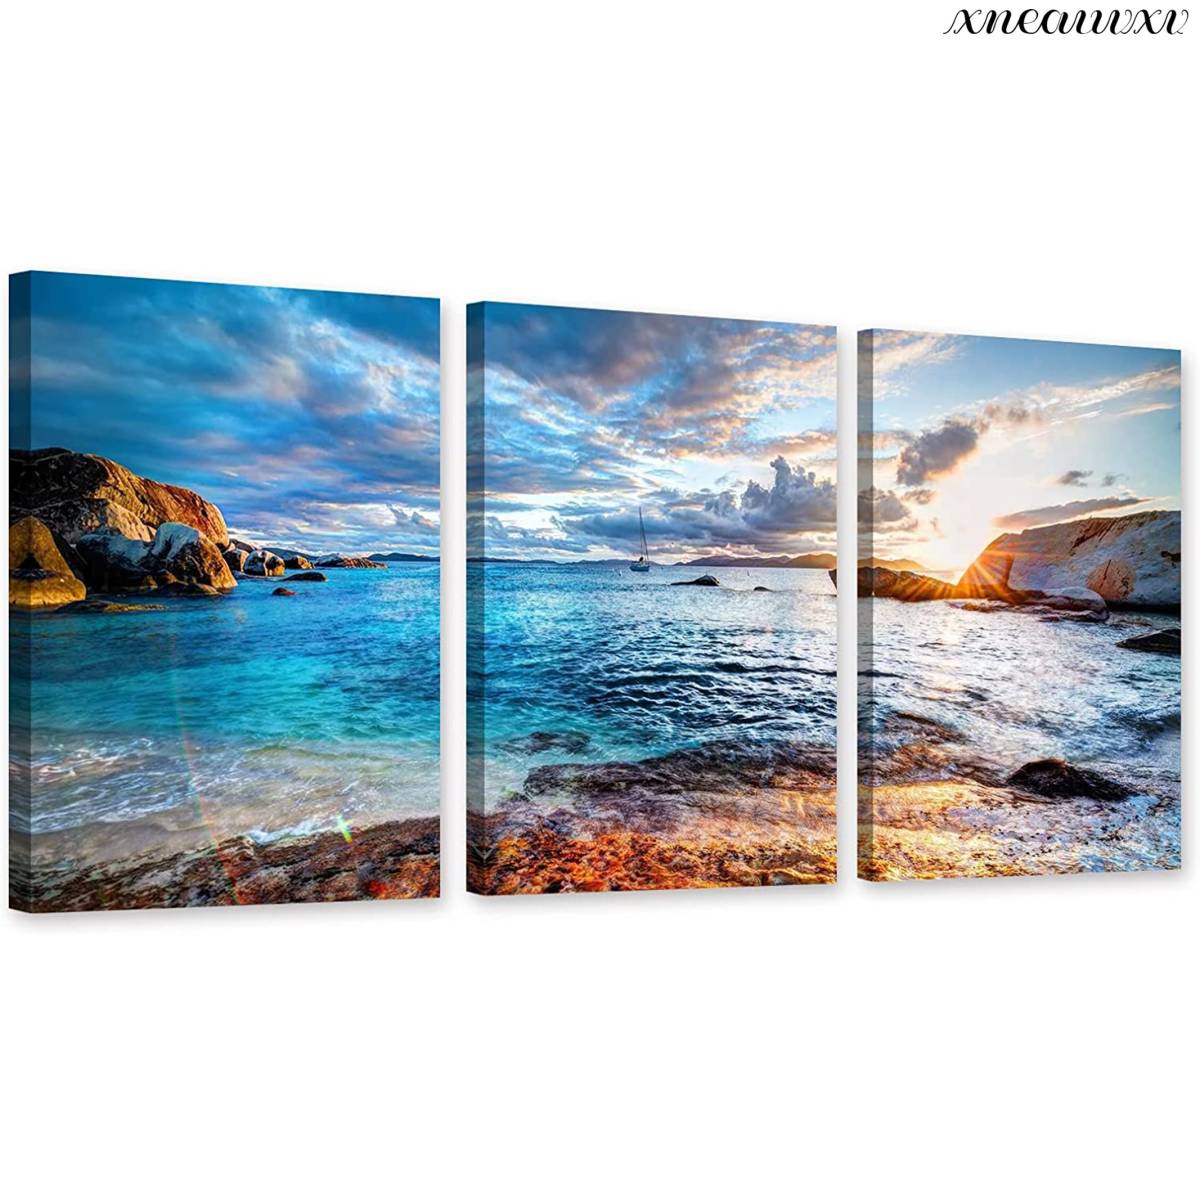 Stylish 3-panel art panel of blue sea interior wall hanging room decoration decorative painting canvas painting fashionable art appreciation art, Artwork, Painting, others